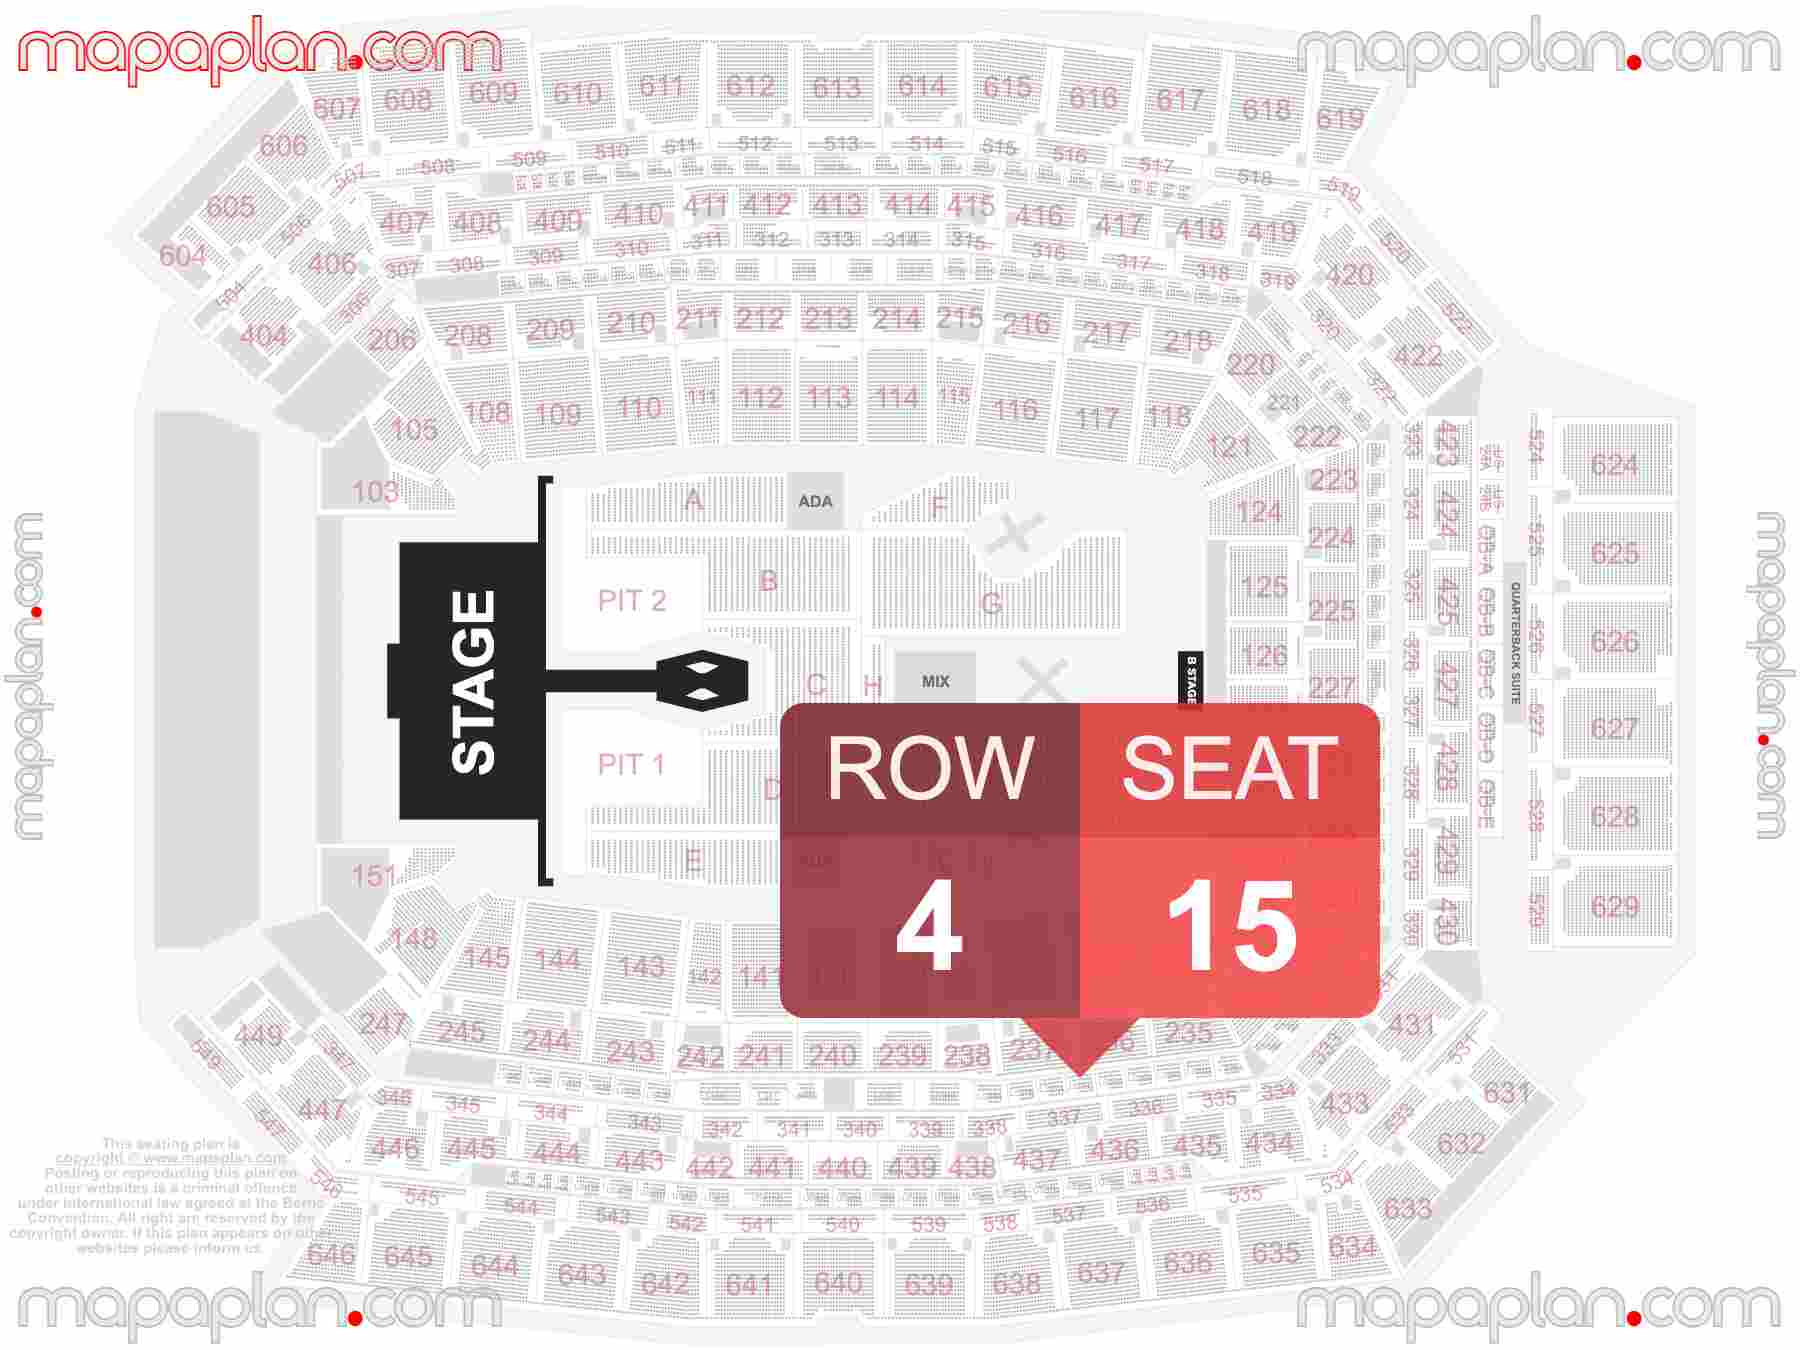 Indianapolis Lucas Oil Stadium seating chart Concert with general admission PIT floor standing seating chart with exact section numbers showing best rows and seats selection 3d layout - Best interactive seat finder tool with precise detailed location data